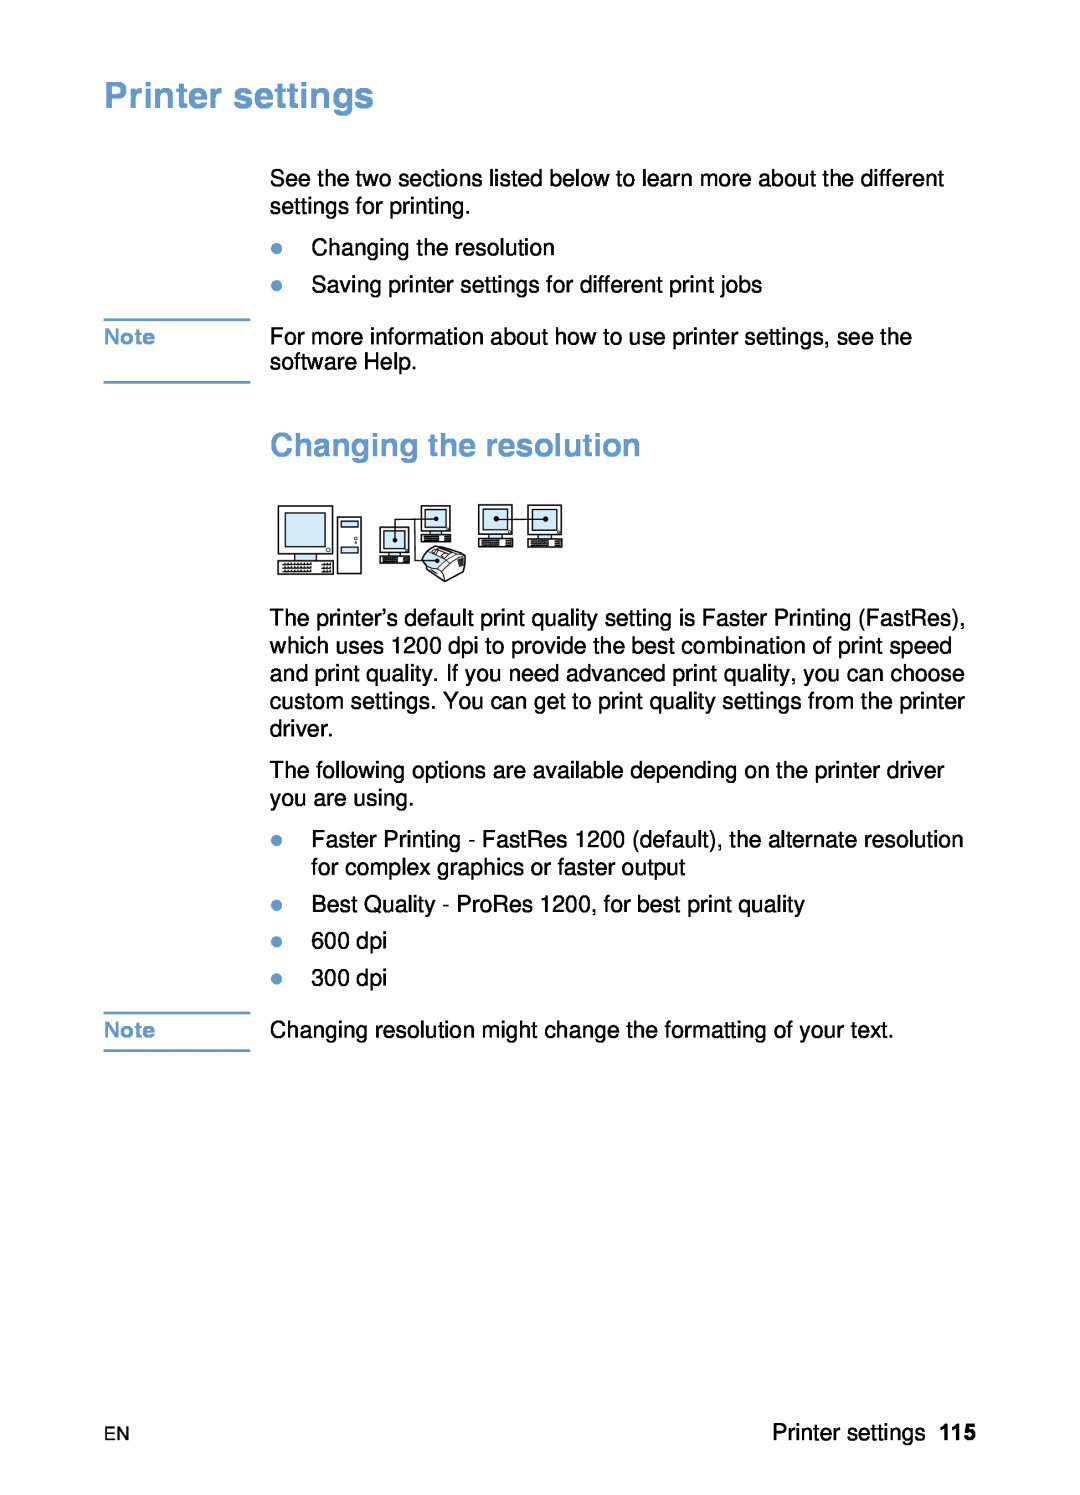 HP 3200 manual Printer settings, Changing the resolution 